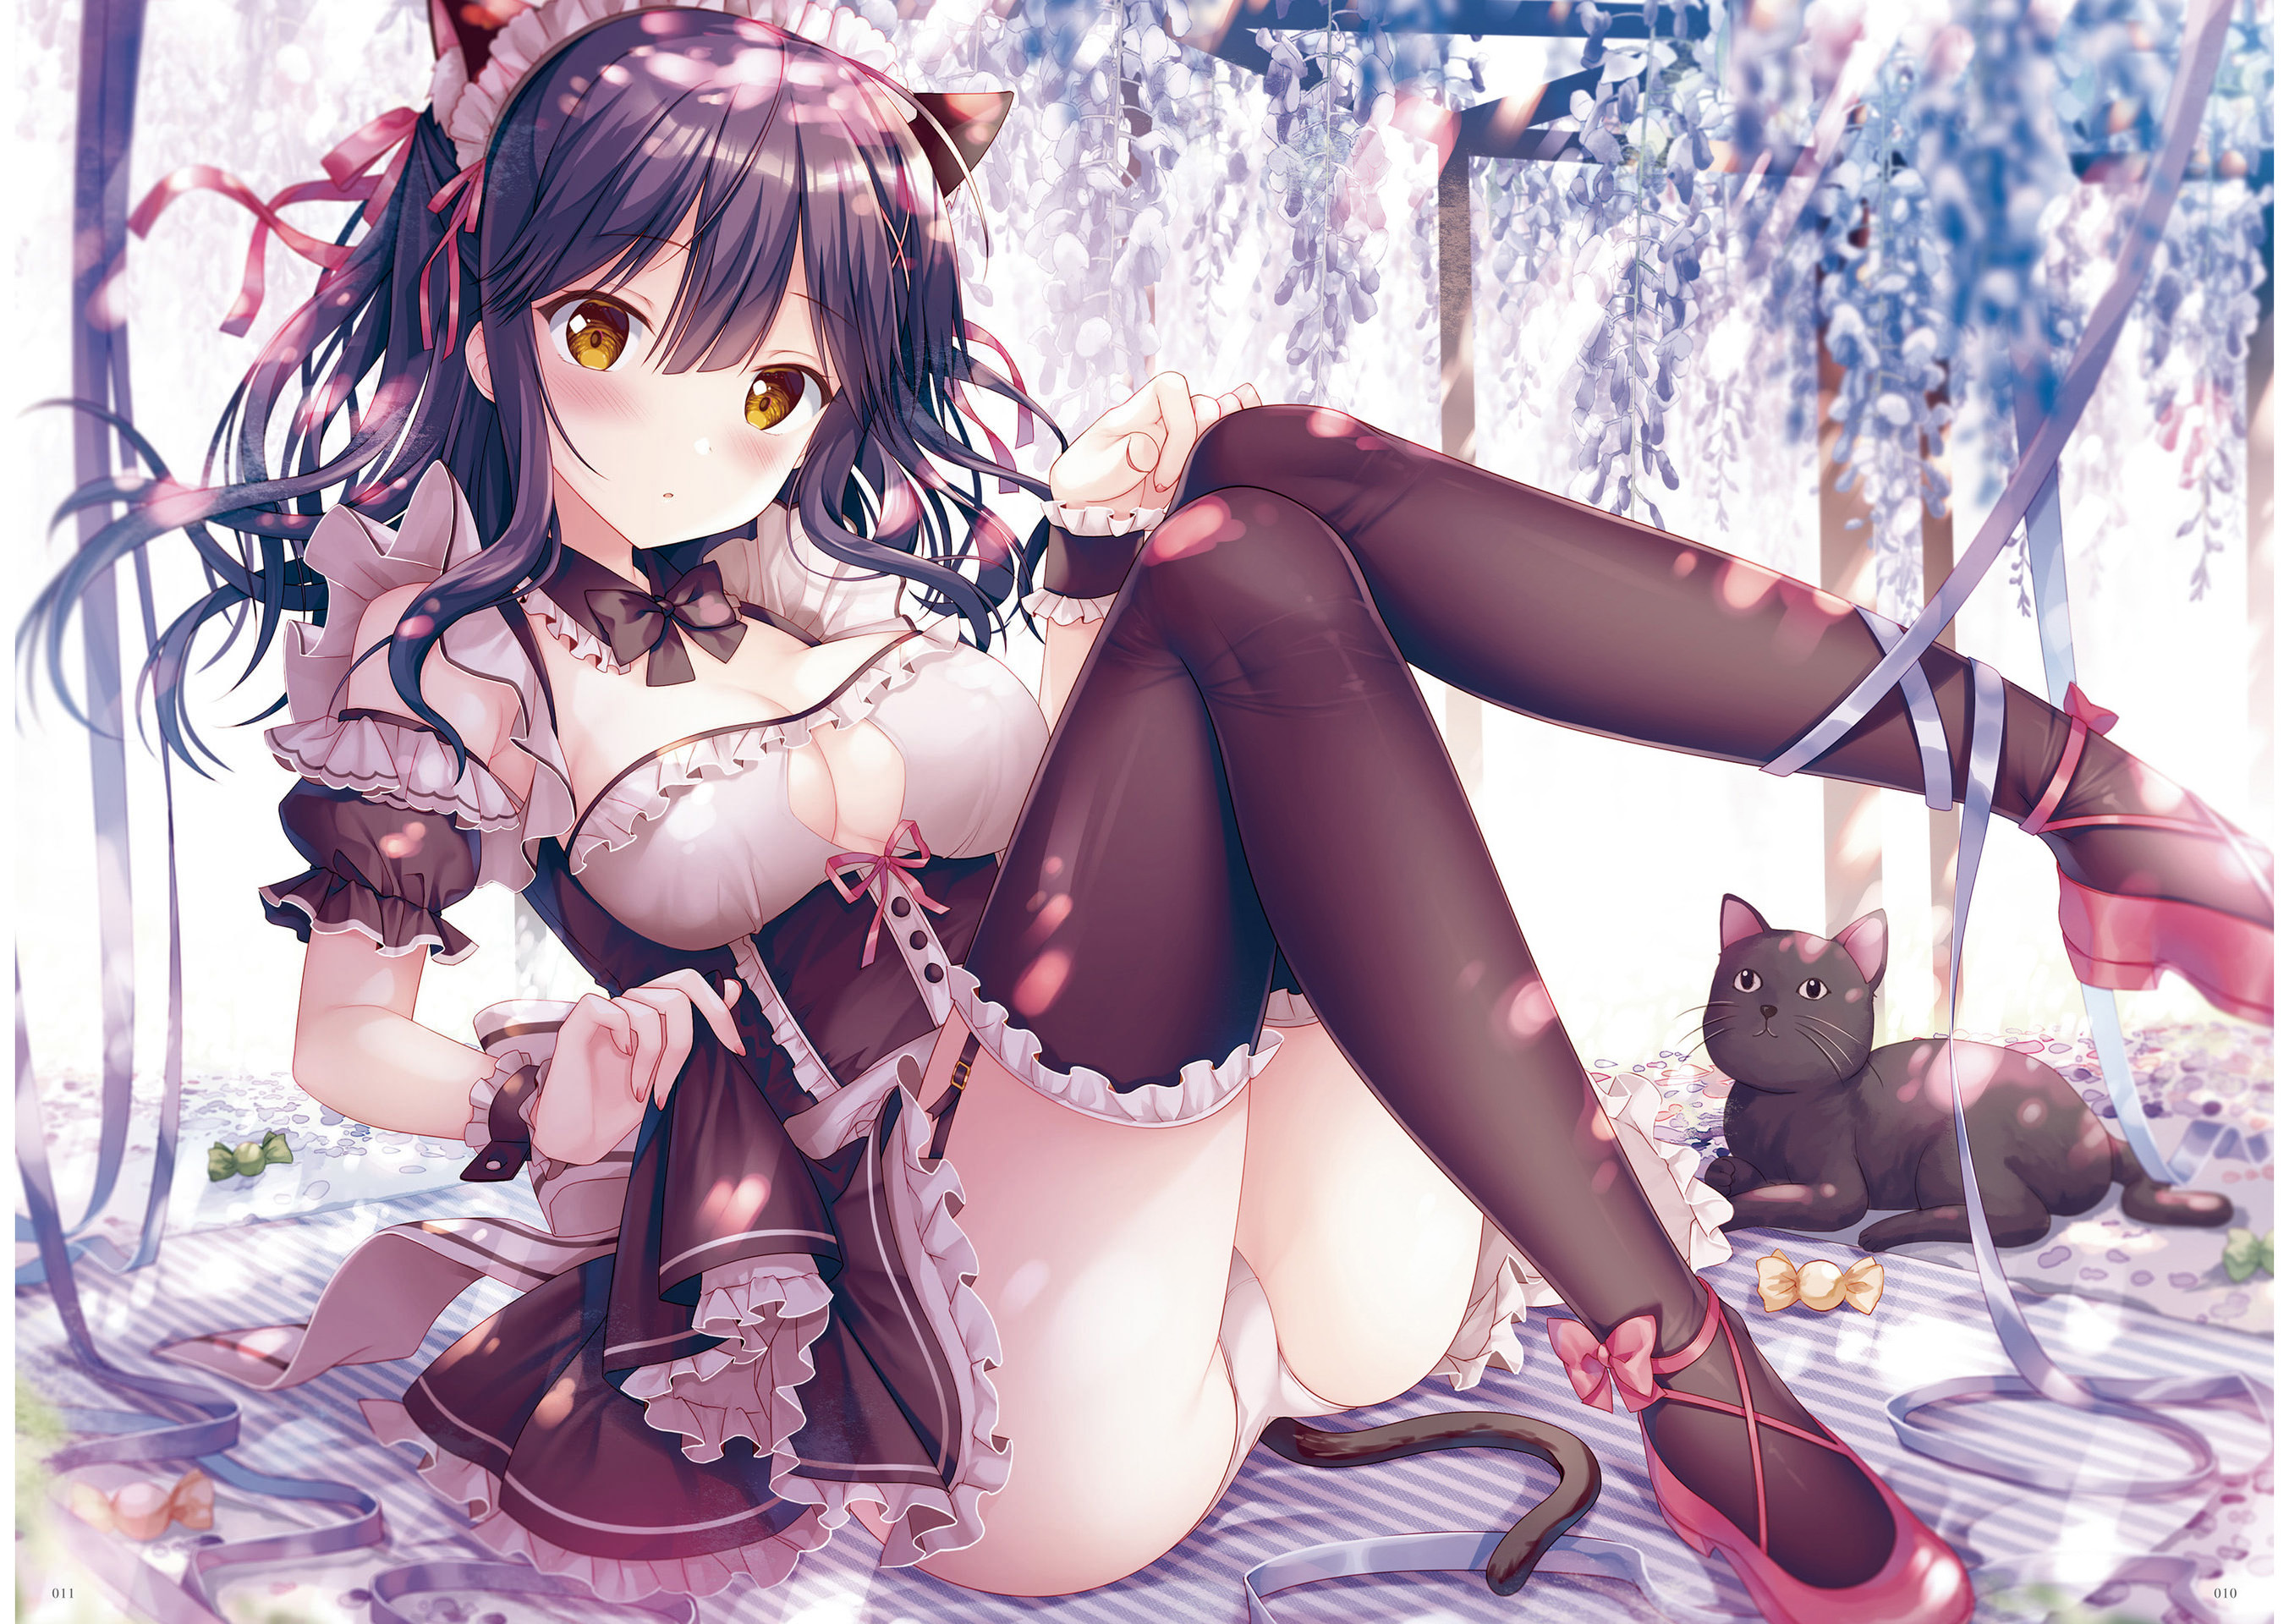 Anime 2706x1920 anime anime girls stockings maid outfit cats cat girl cat ears cat tail brown eyes panties candy big boobs bow tie blushing maid